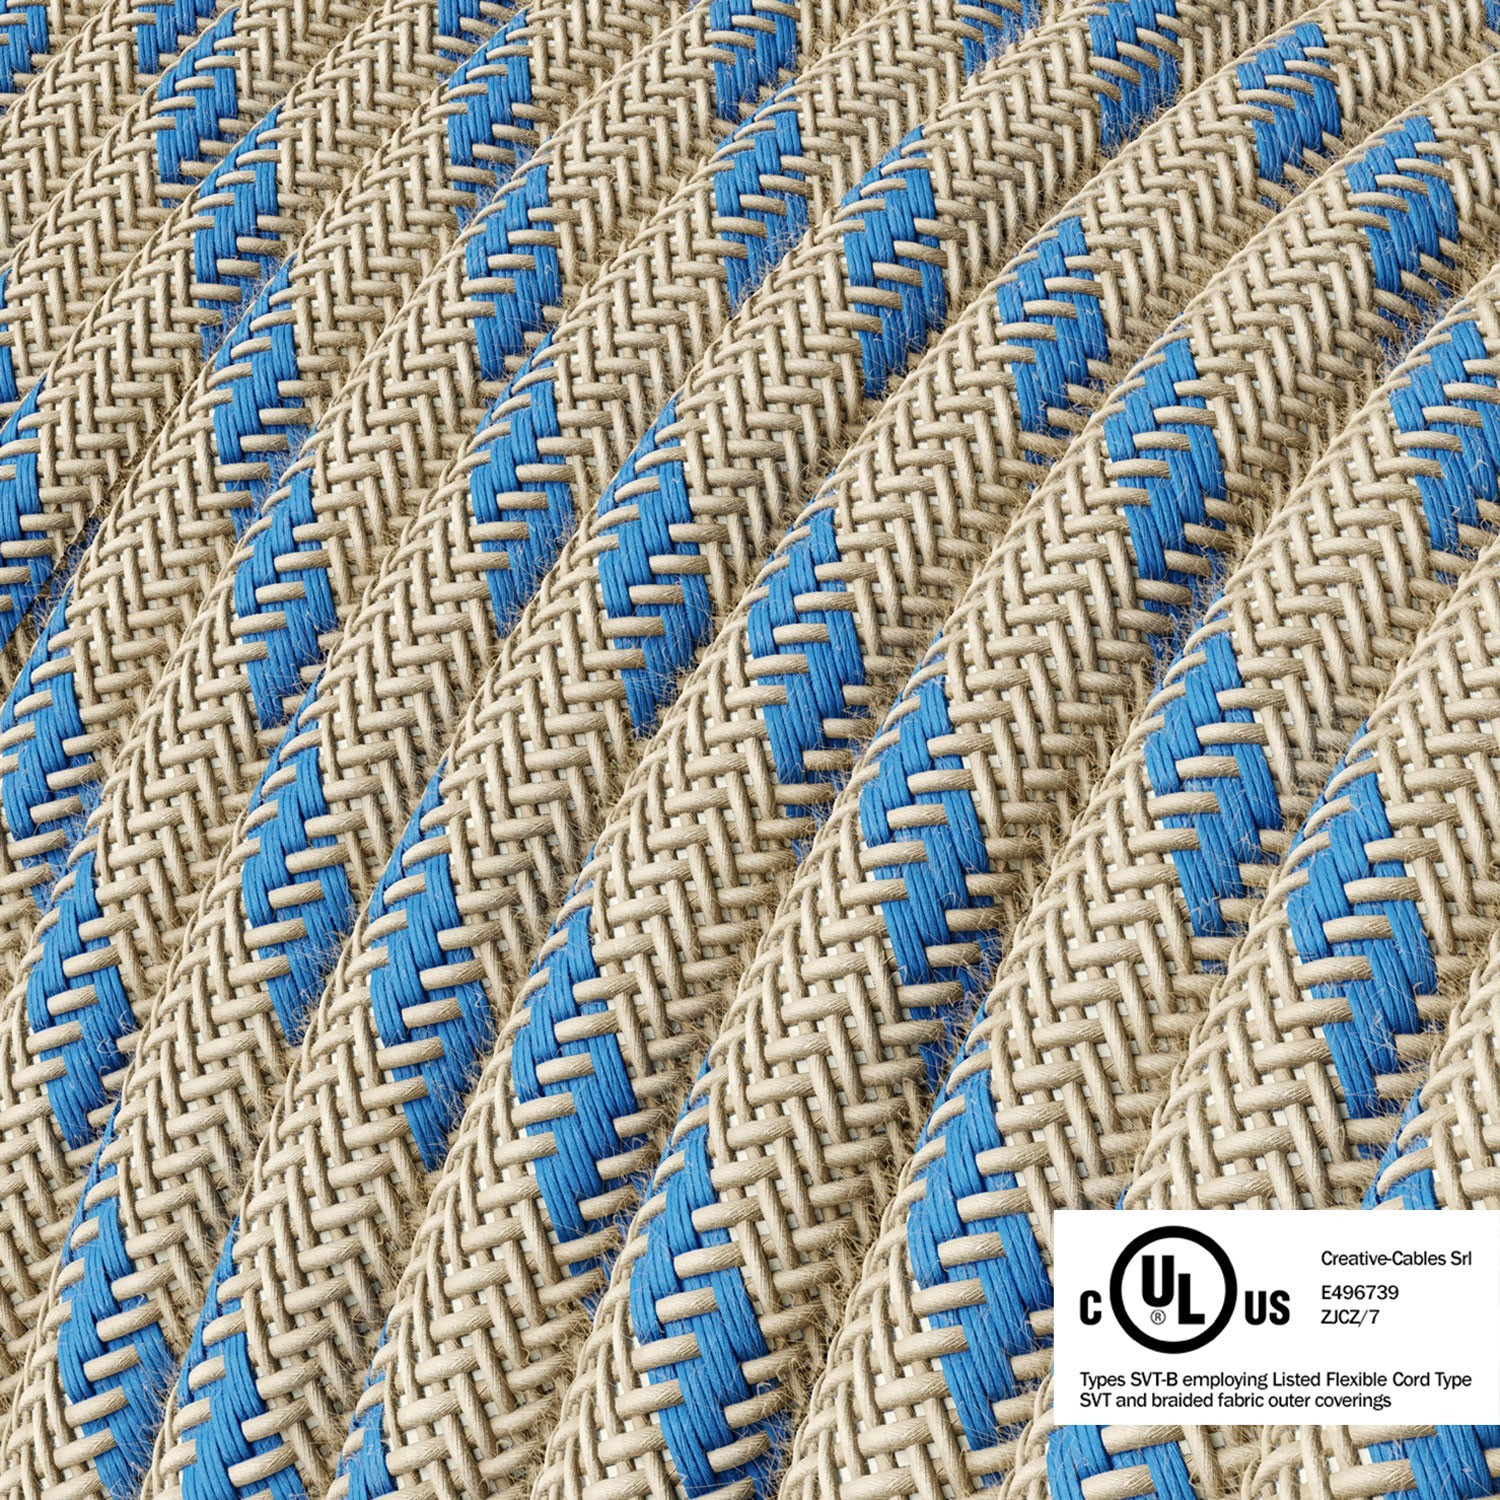 Round Electric Cable 150 ft (45,72 m) coil RD55 Stripes Steward Blue Cotton and Natural Linen - UL listed